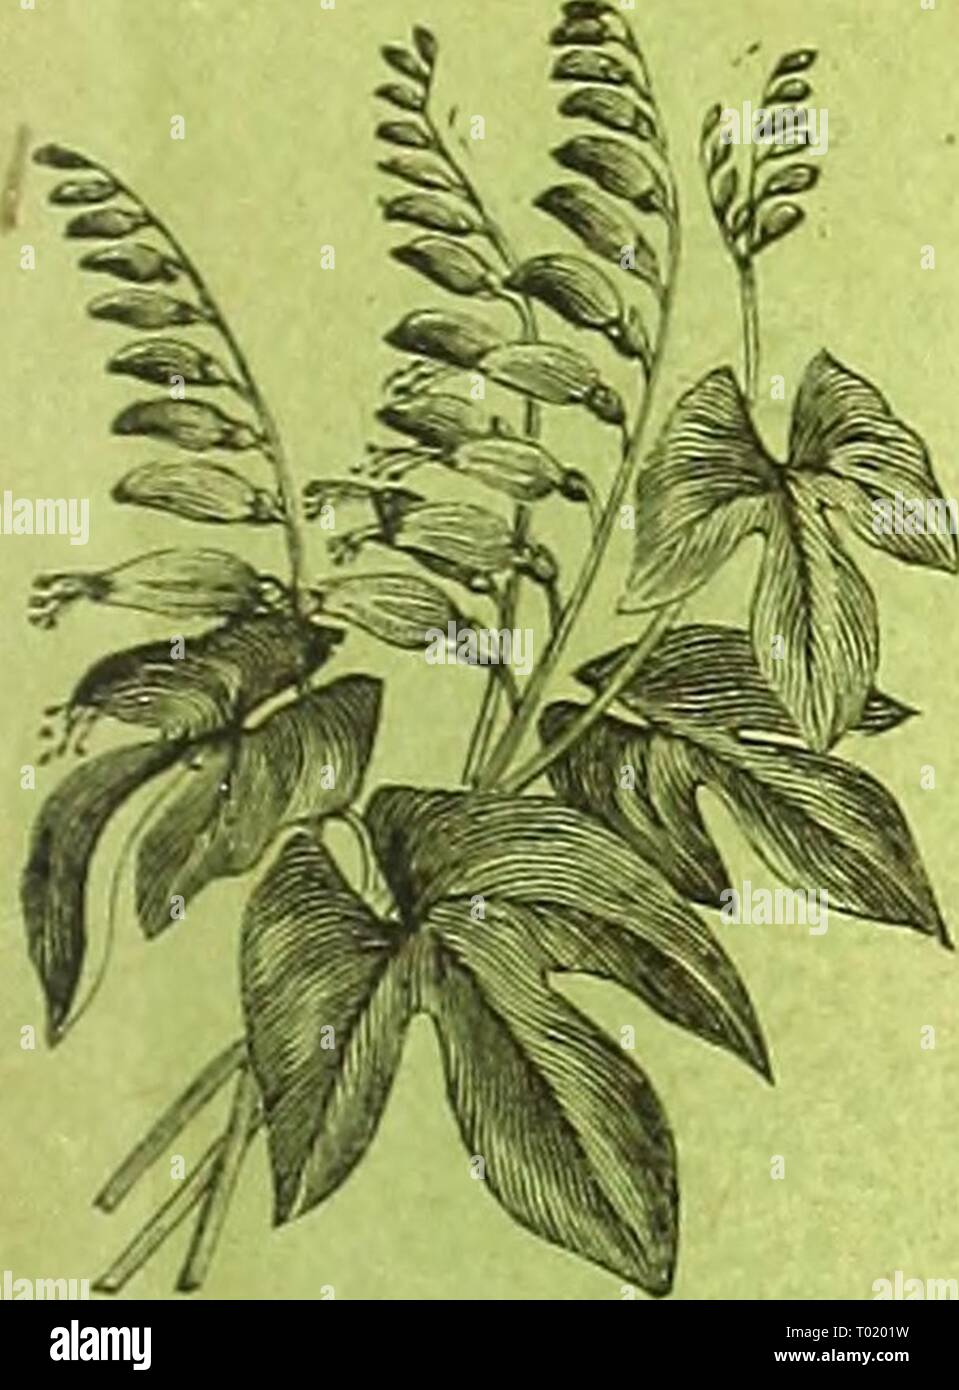 Dreer's garden calendar . dreersgardencale1890henr Year: 1890  NOVELTIES AND SPECIALTIES FOR 1890. IX LOBELIA LITTORALIS. A very pretty variety for growing iu tiie liouse or green- house in hanging pots or baslcets. The plants are oftrail- i habit, often attaining a length of 2 feet. The pnre white (lowers are borne on upright stems in large numbers. The seeJ pods when ripe are a puri)lish red, making the plant as attractive as when in bloom. o. mx?,. Per pkt. 25 cts. DOUBLE AFRICAN MARIGOLD â PRINCESS. Dwarf, lemon'eolored. A seleelion from early dwarf double .tVieau M. and like it about  Stock Photo